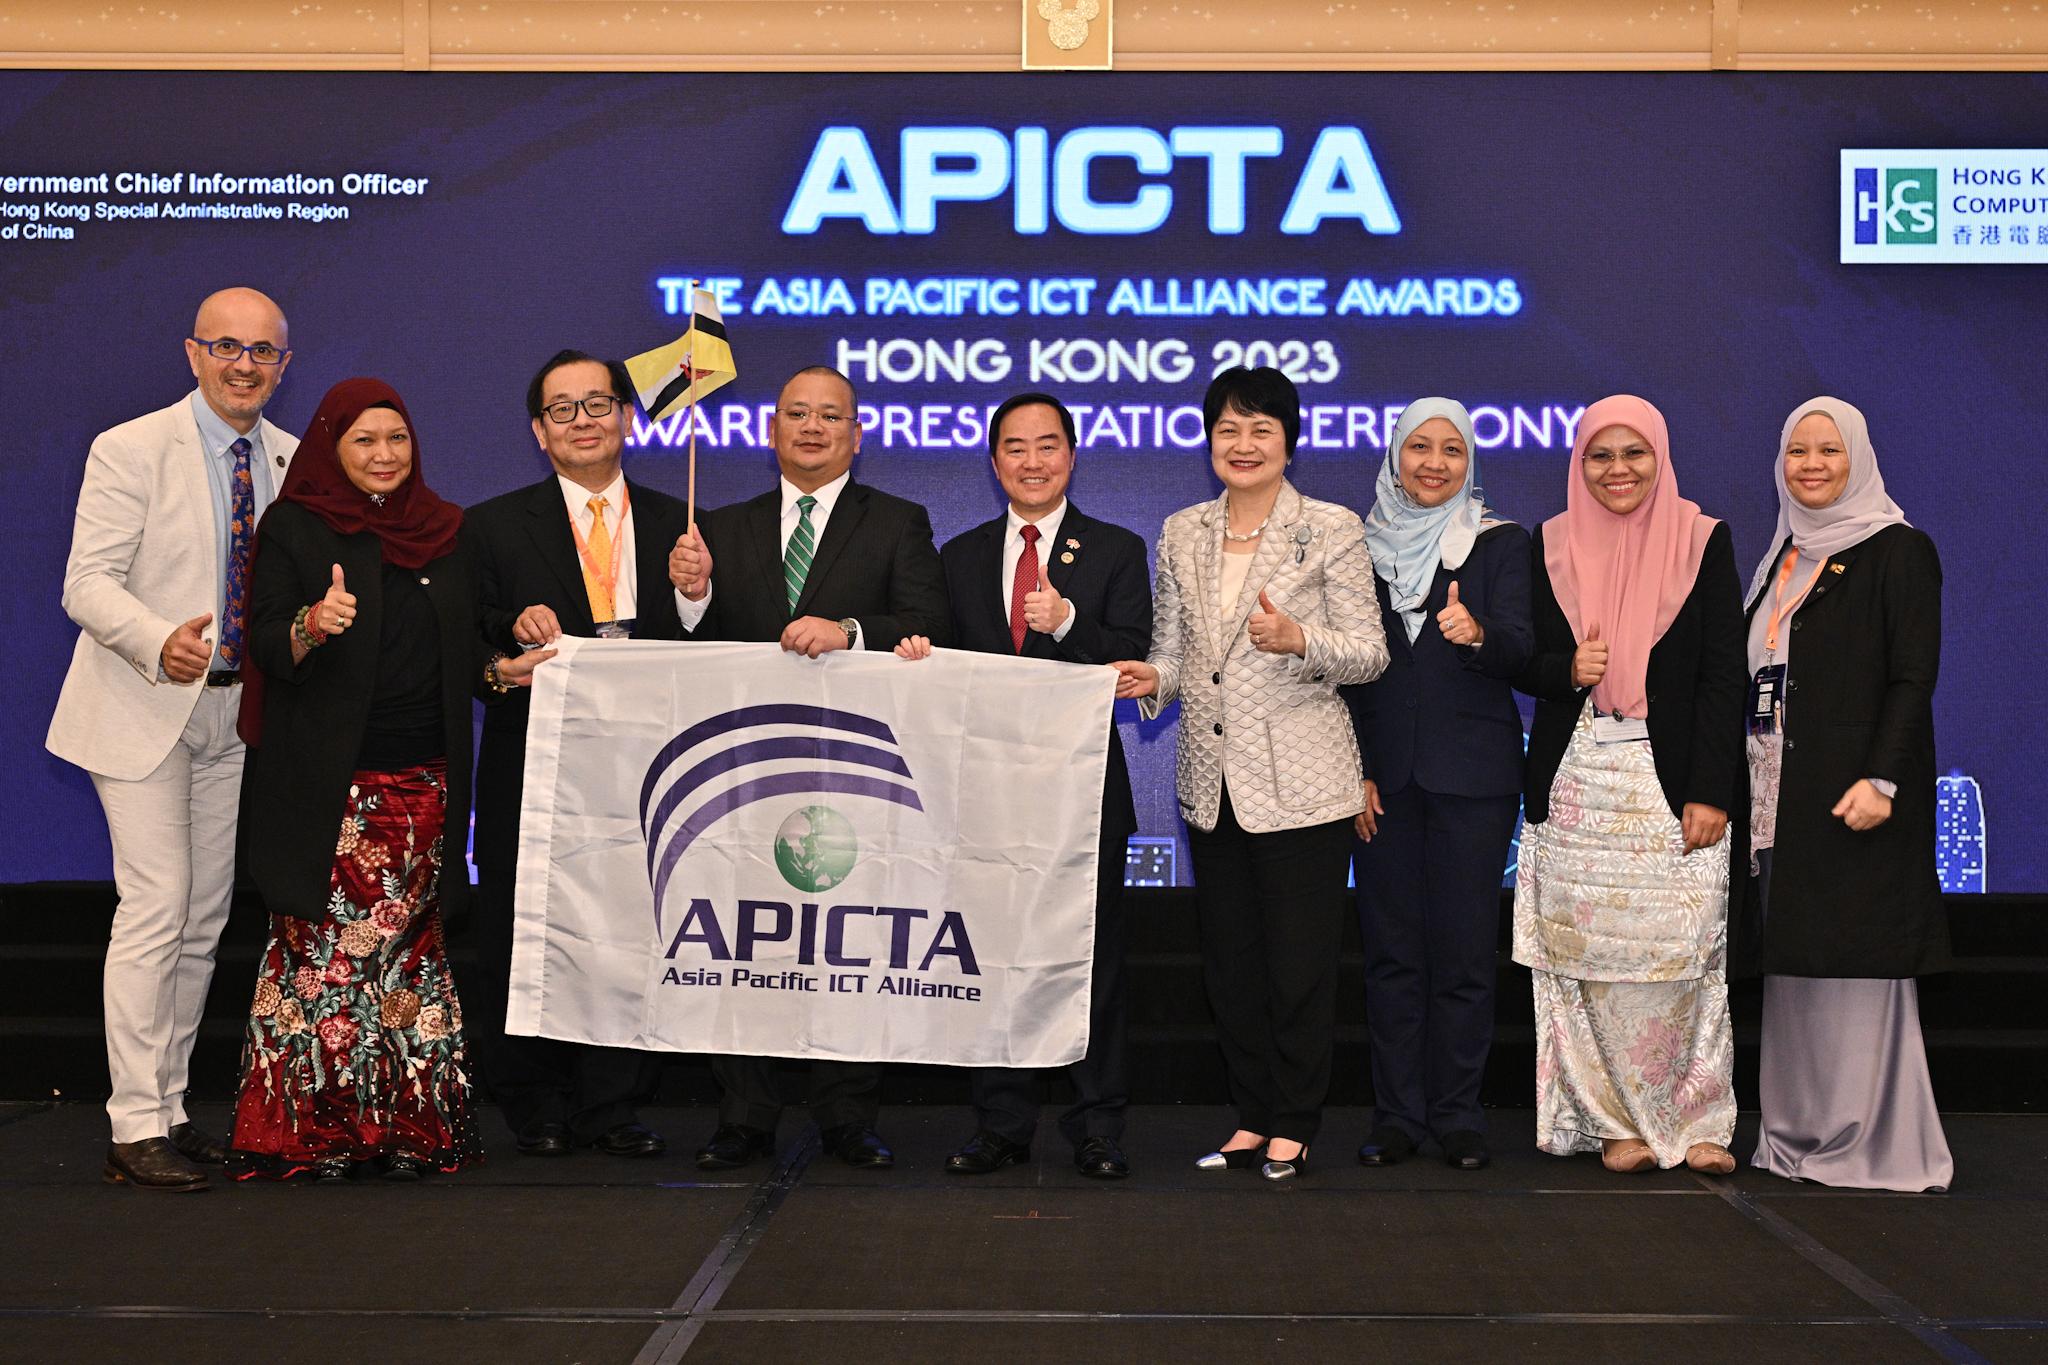 The Government Chief Information Officer, Mr Tony Wong (centre), joins other guests and representatives from Brunei Darussalam at the Awards Presentation Ceremony of the Asia Pacific Information and Communications Technology Alliance Awards 2023 today (December 8). Brunei Darussalam has been chosen as the host of the 23rd APICTA Awards next year.